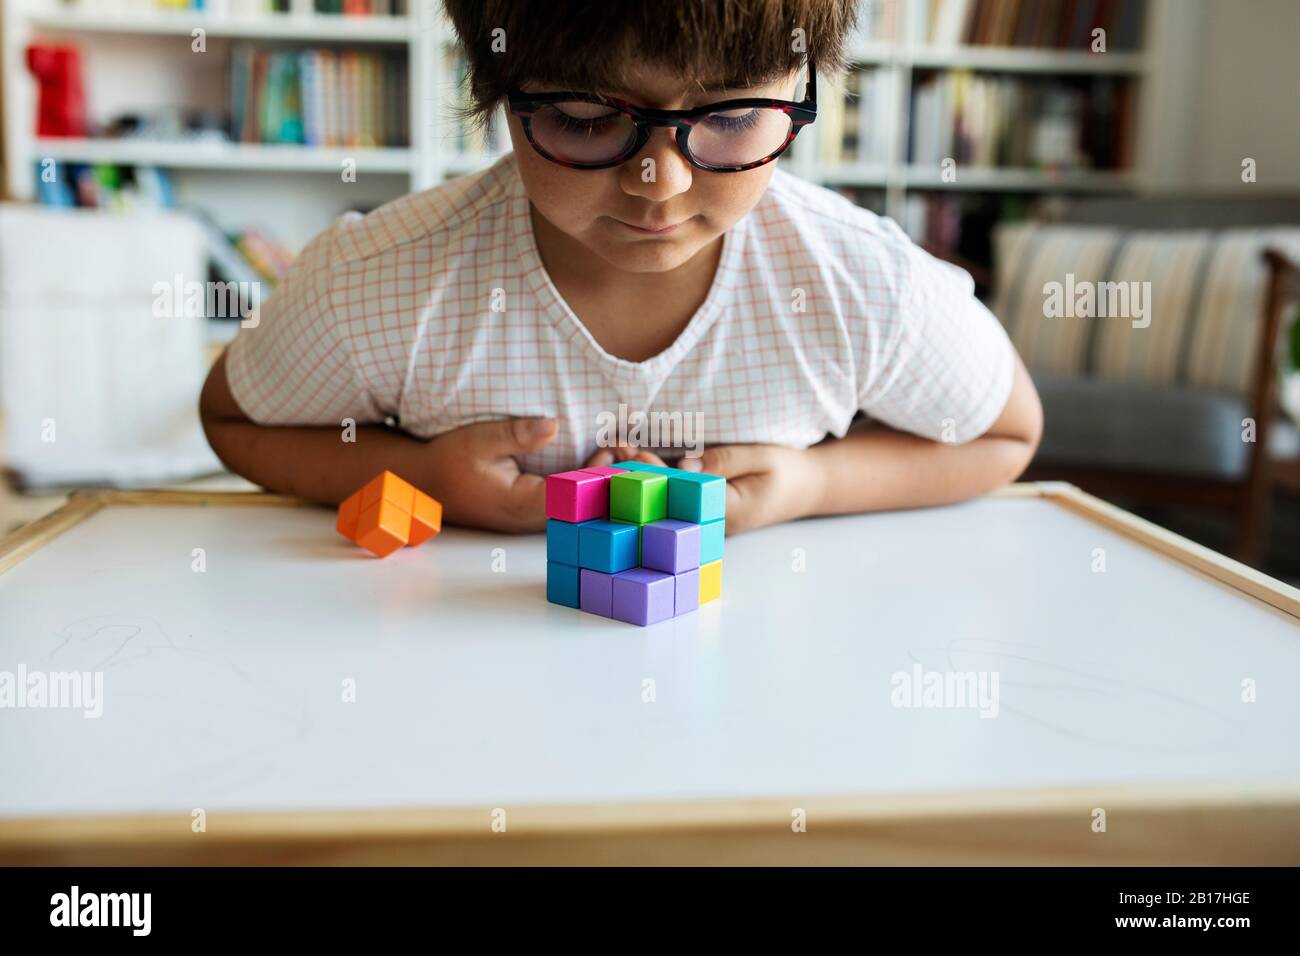 Little boy with glasses playing with building blocks at home Stock Photo